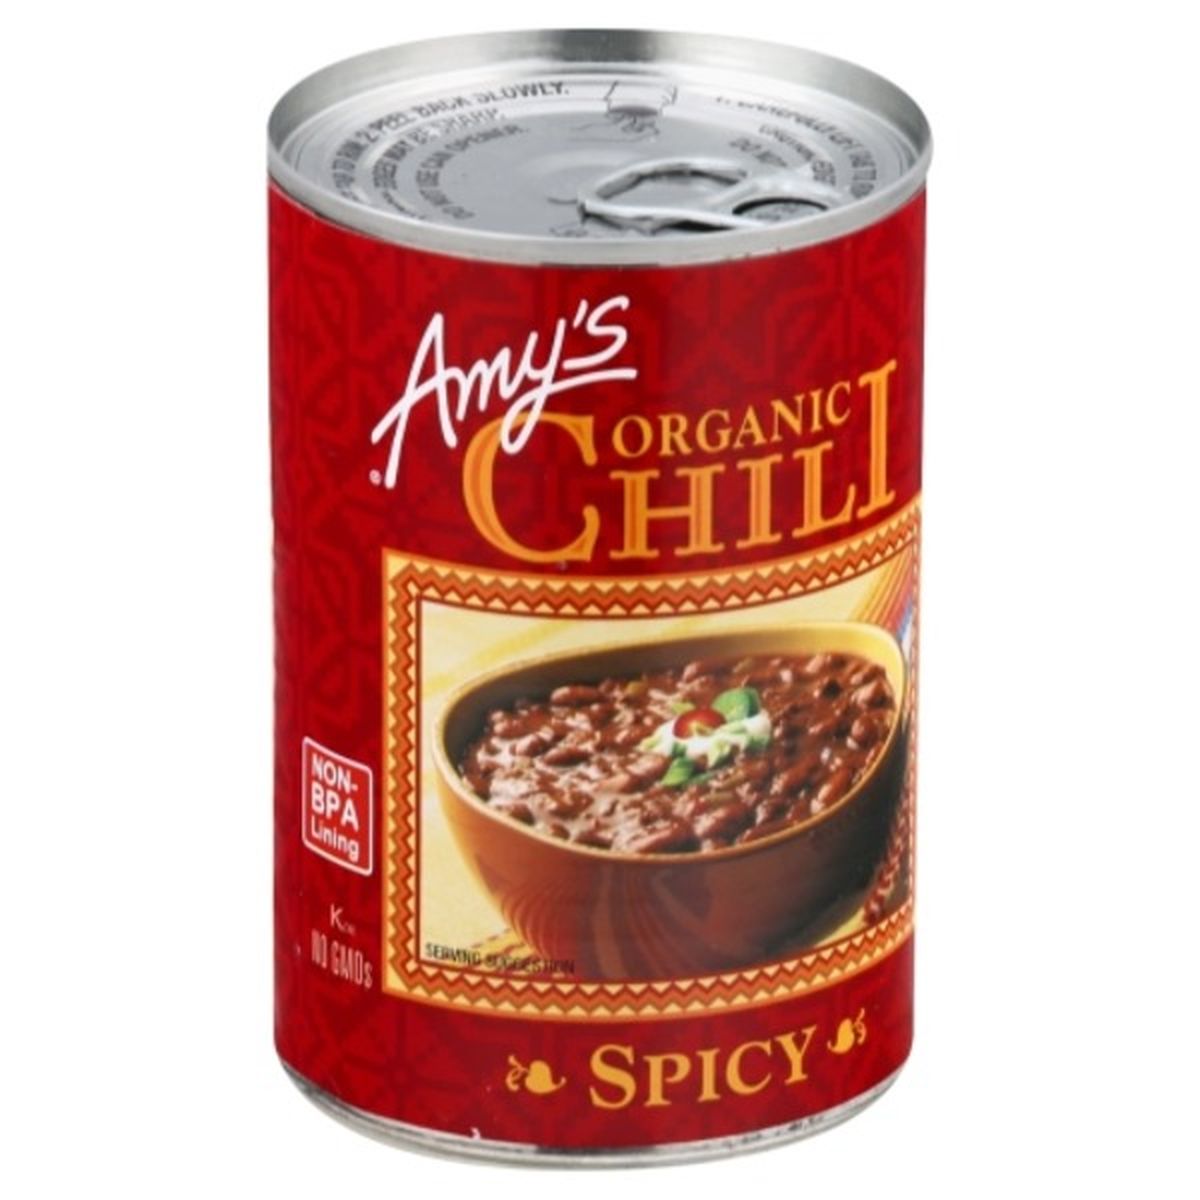 Calories in Amy's Kitchen Chili, Organic, Spicy